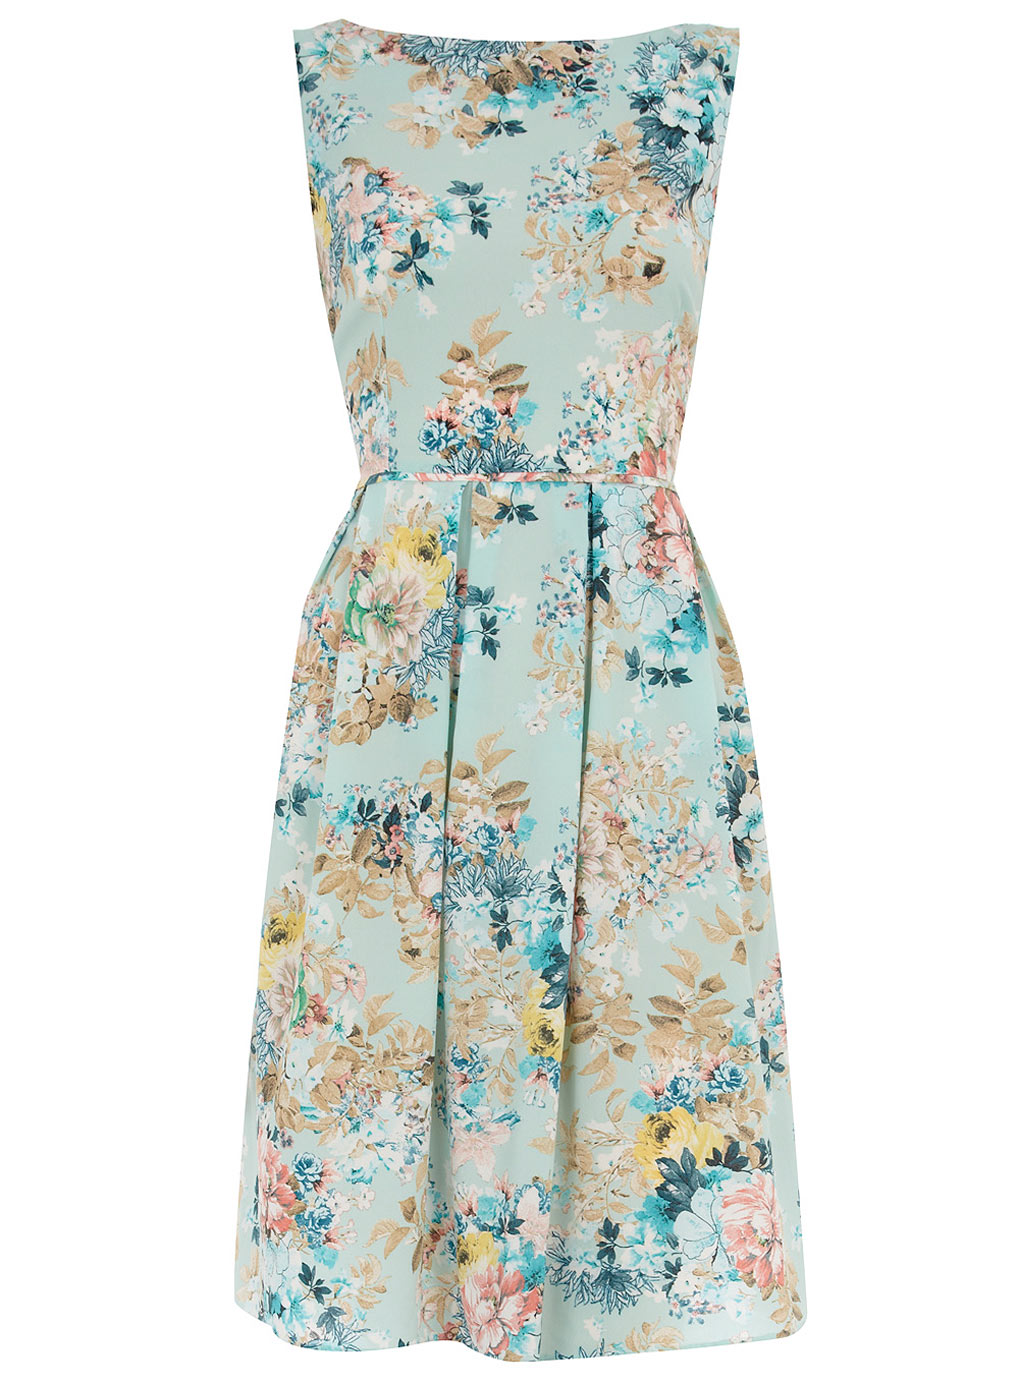 dorothy perkins blue floral prom dress this is my first dress